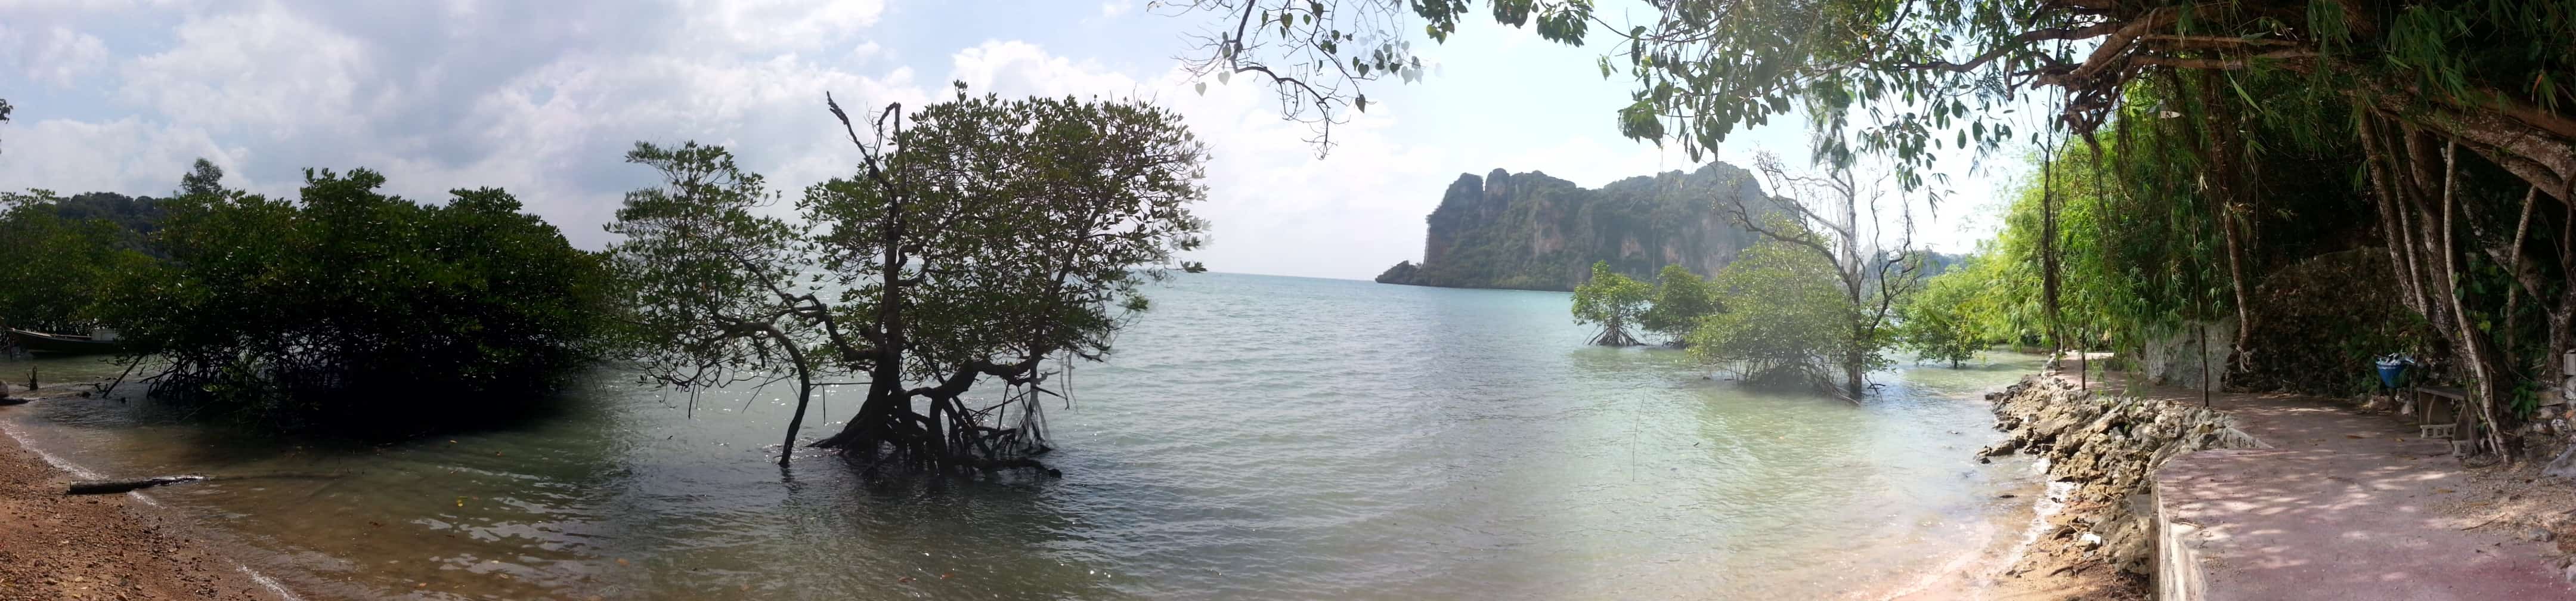 What to do in Railay Thailand